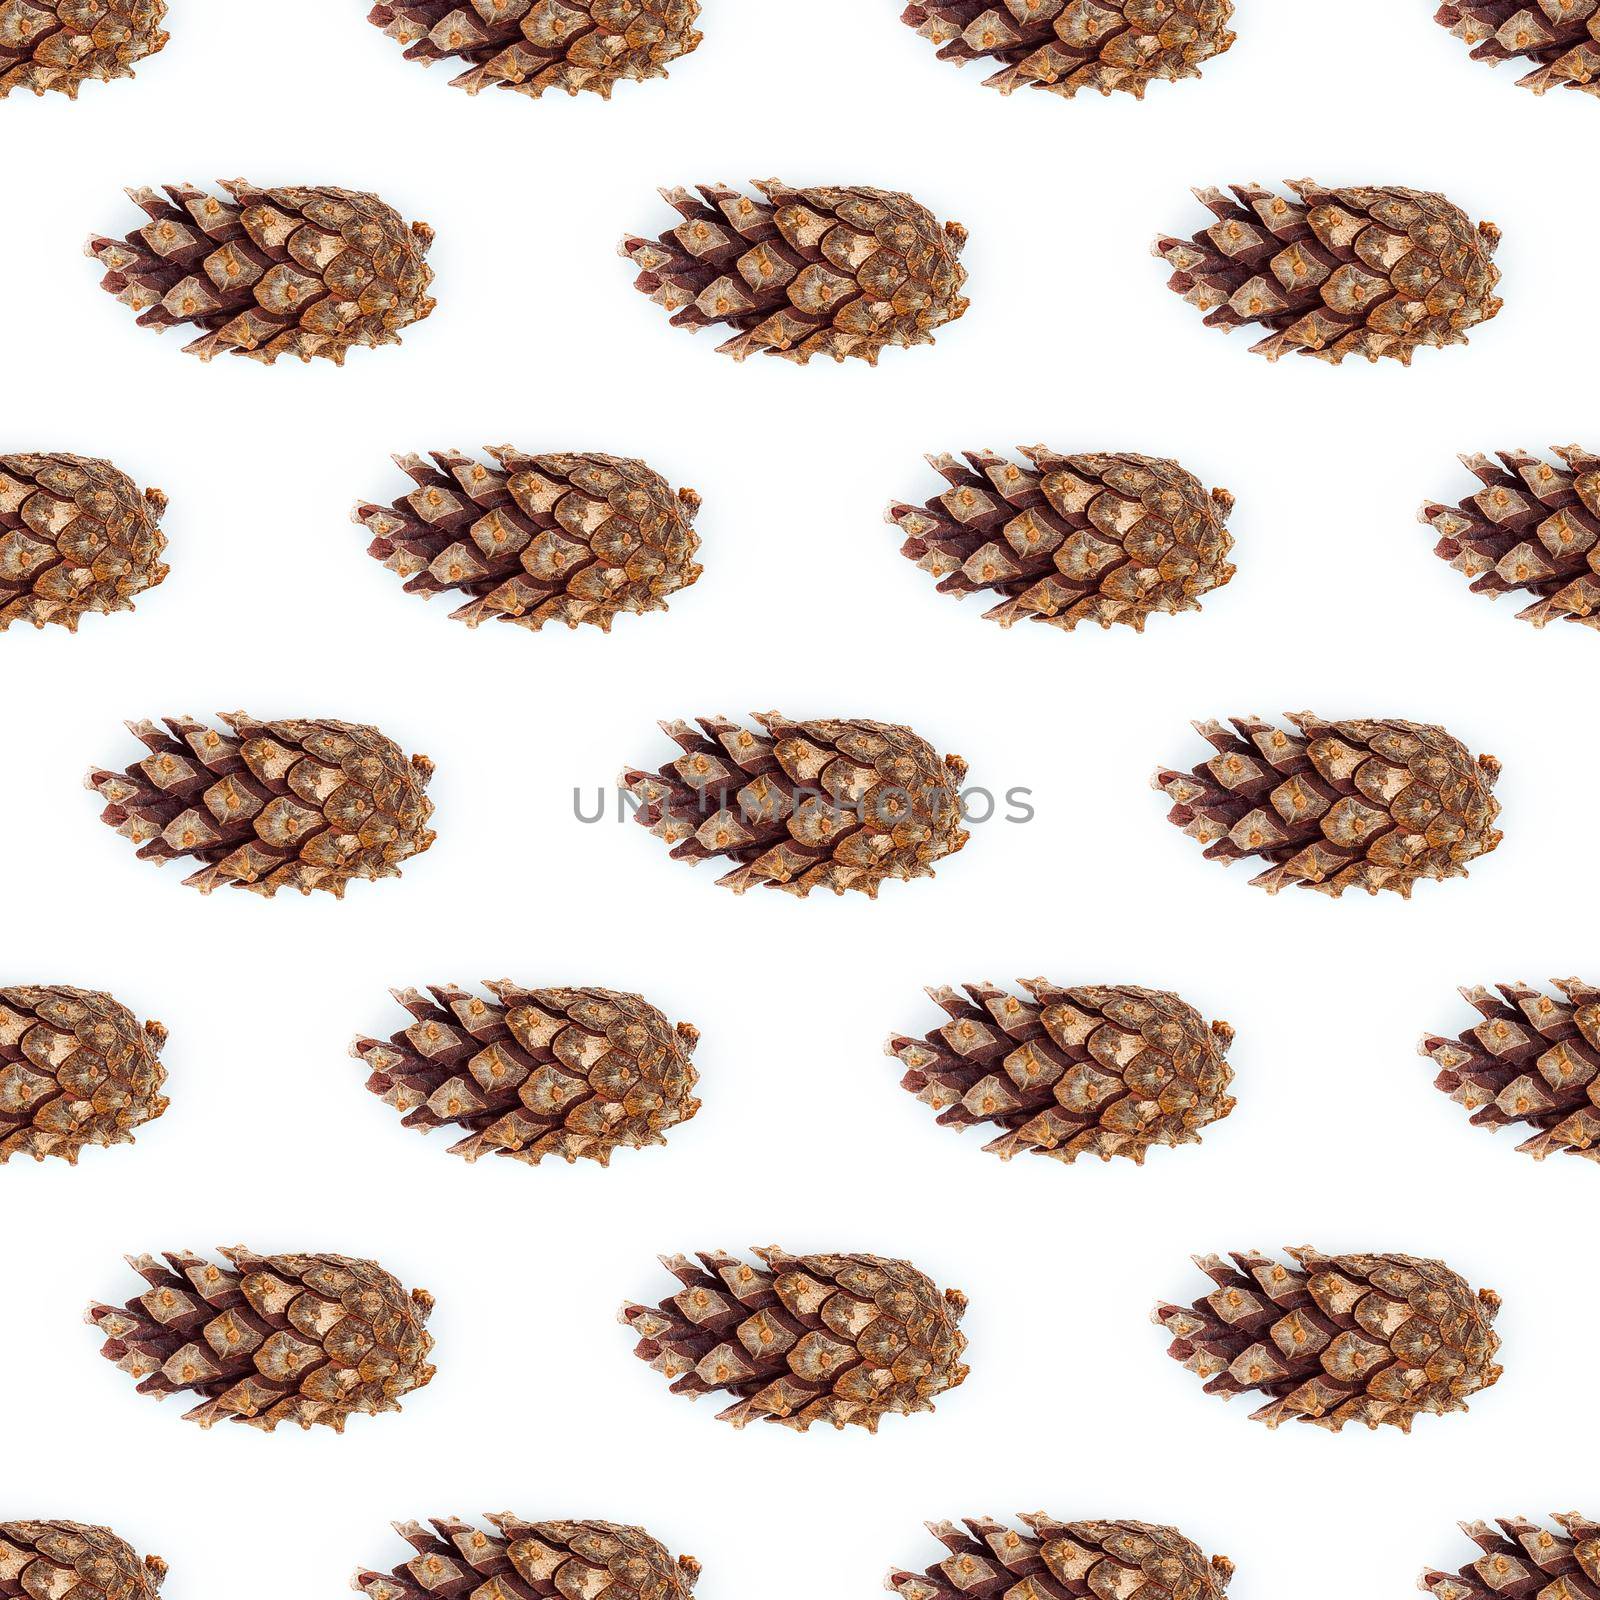 Fir tree cone on a white background abstract seamless pattern. Christmas, decoration, holiday, party, winter, xmas, celebration, conifer, decorative, merry, new.